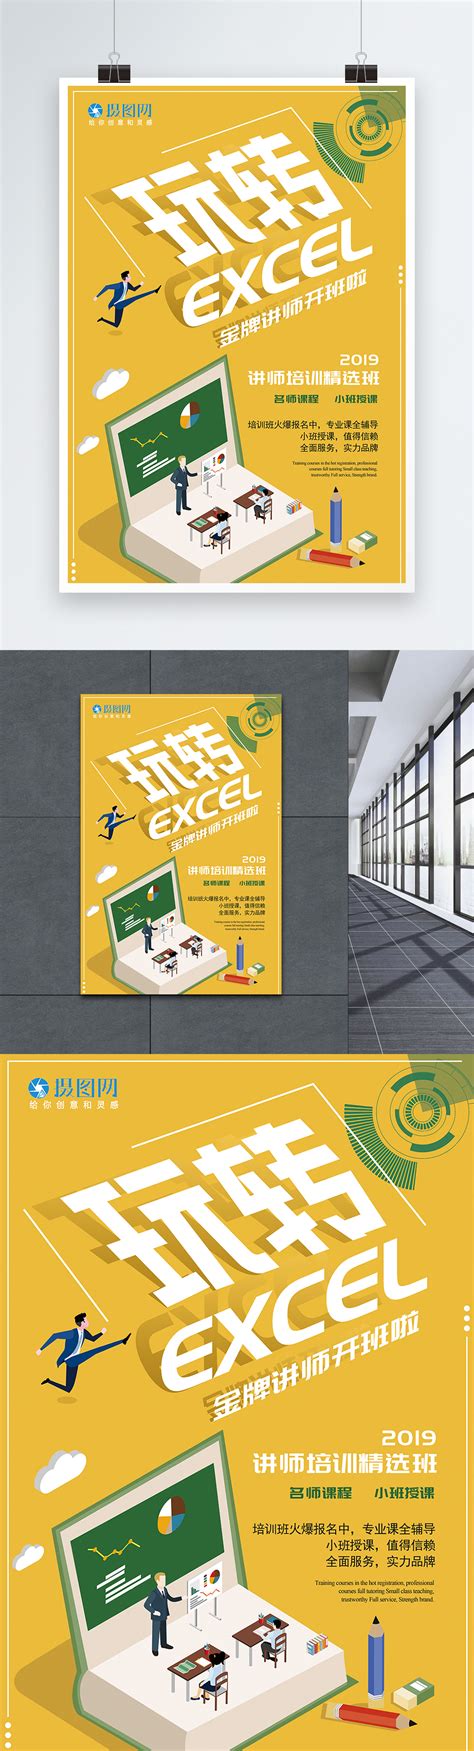 Yellow Play Excel Gold Medal Lecturer Course Training Poster Template